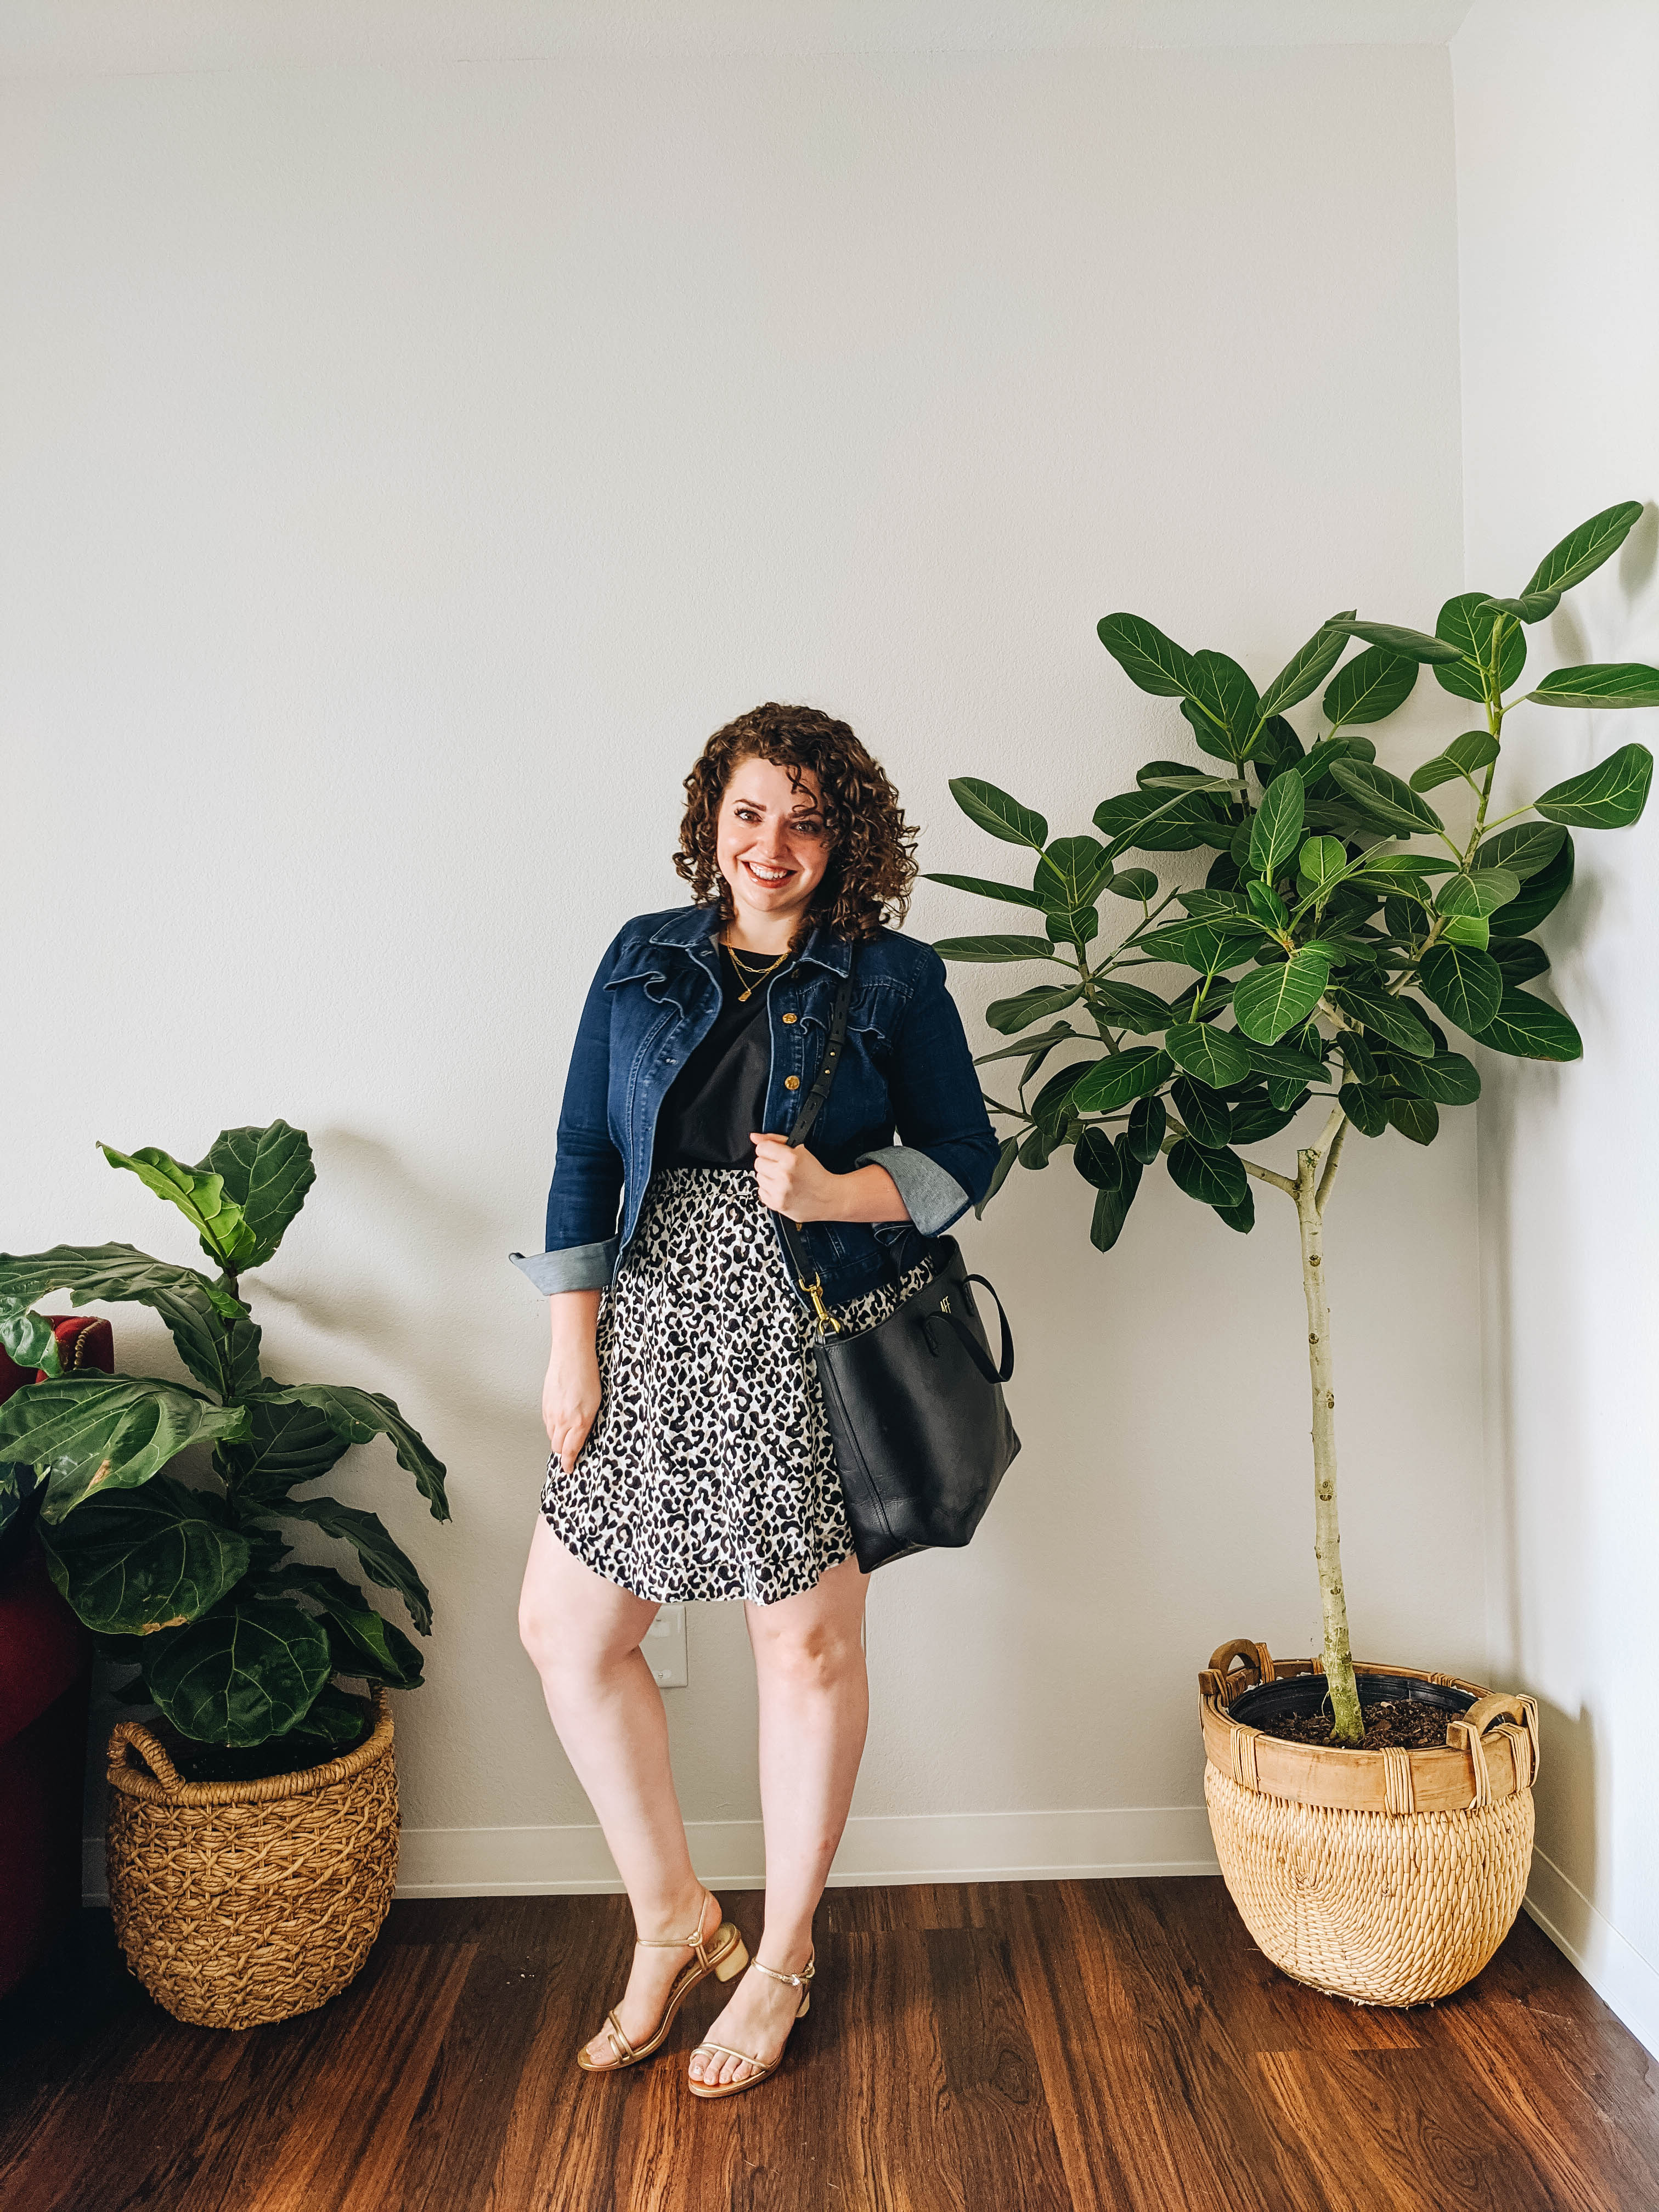 5 ways to wear an animal print skirt from work to weekend! | Honestlyrelatable.com